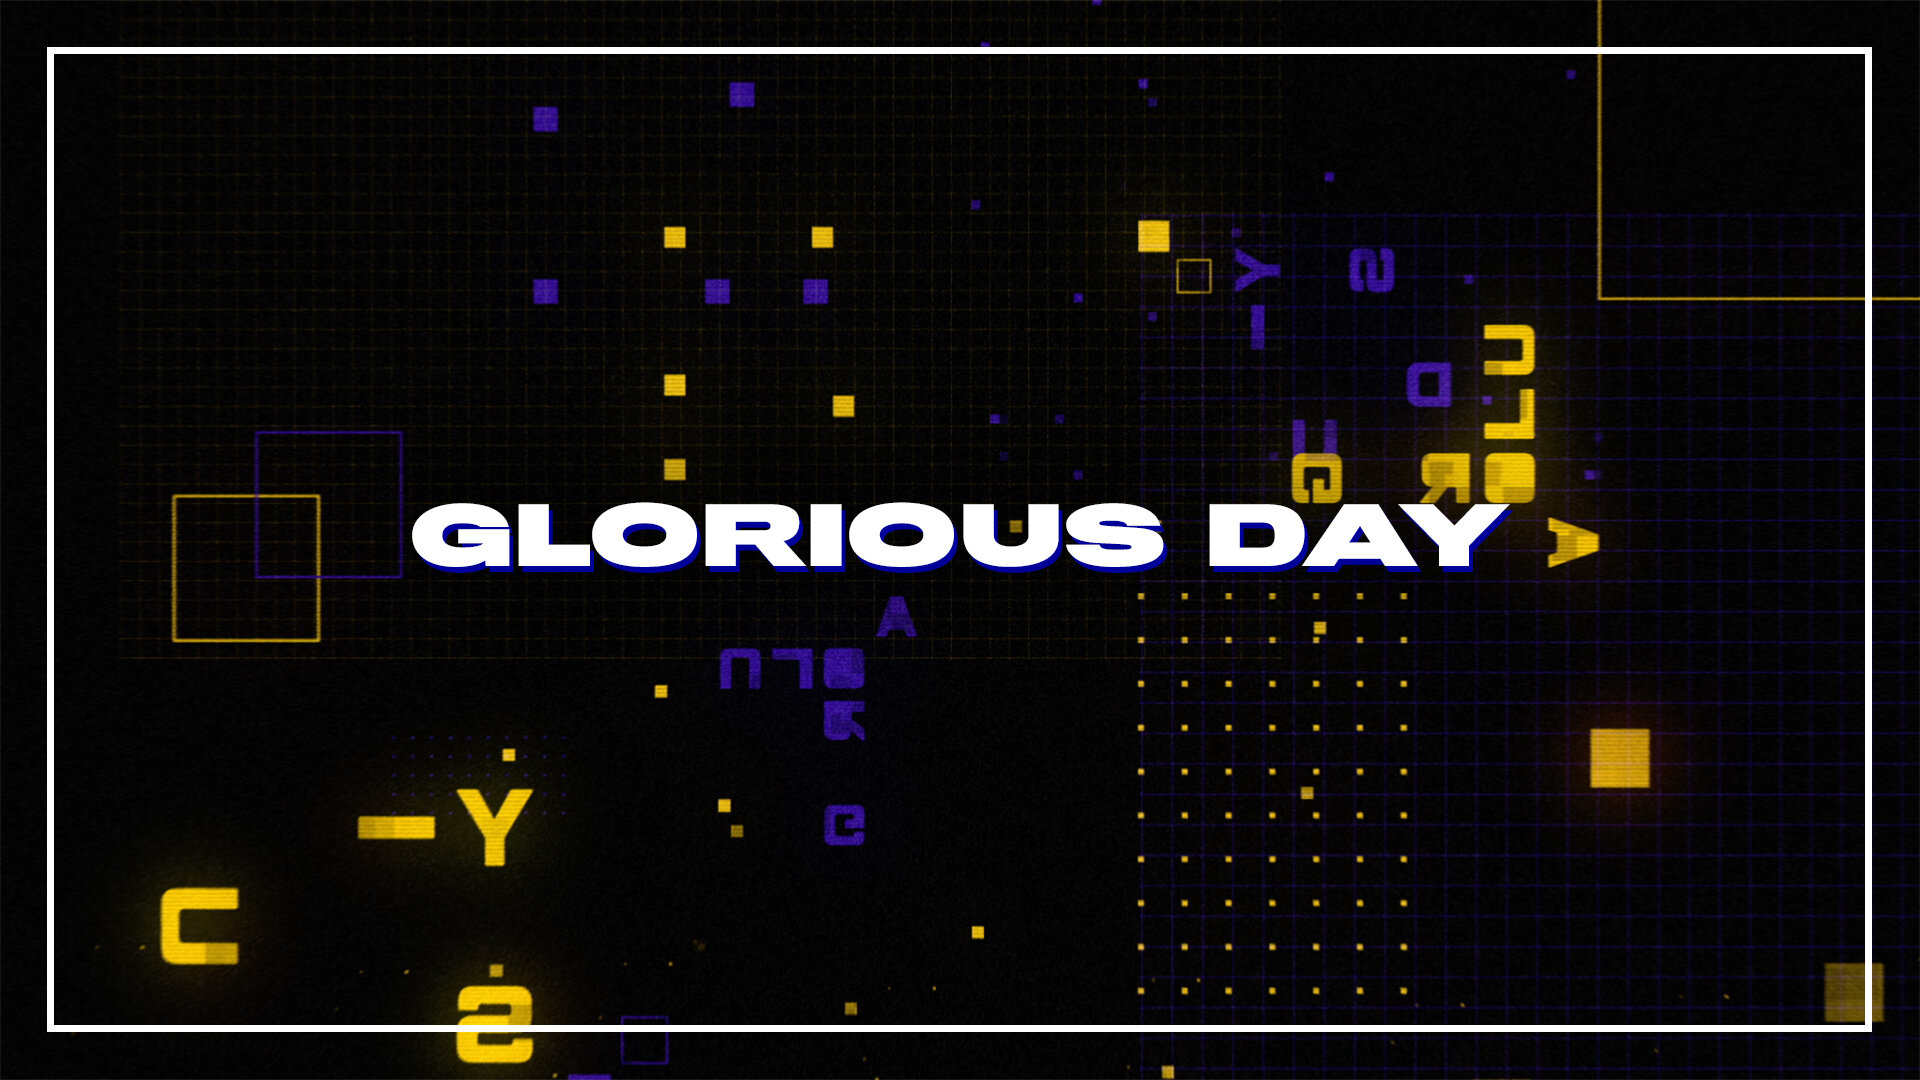 SeeingSounds_GloriousDay_Poster.jpg